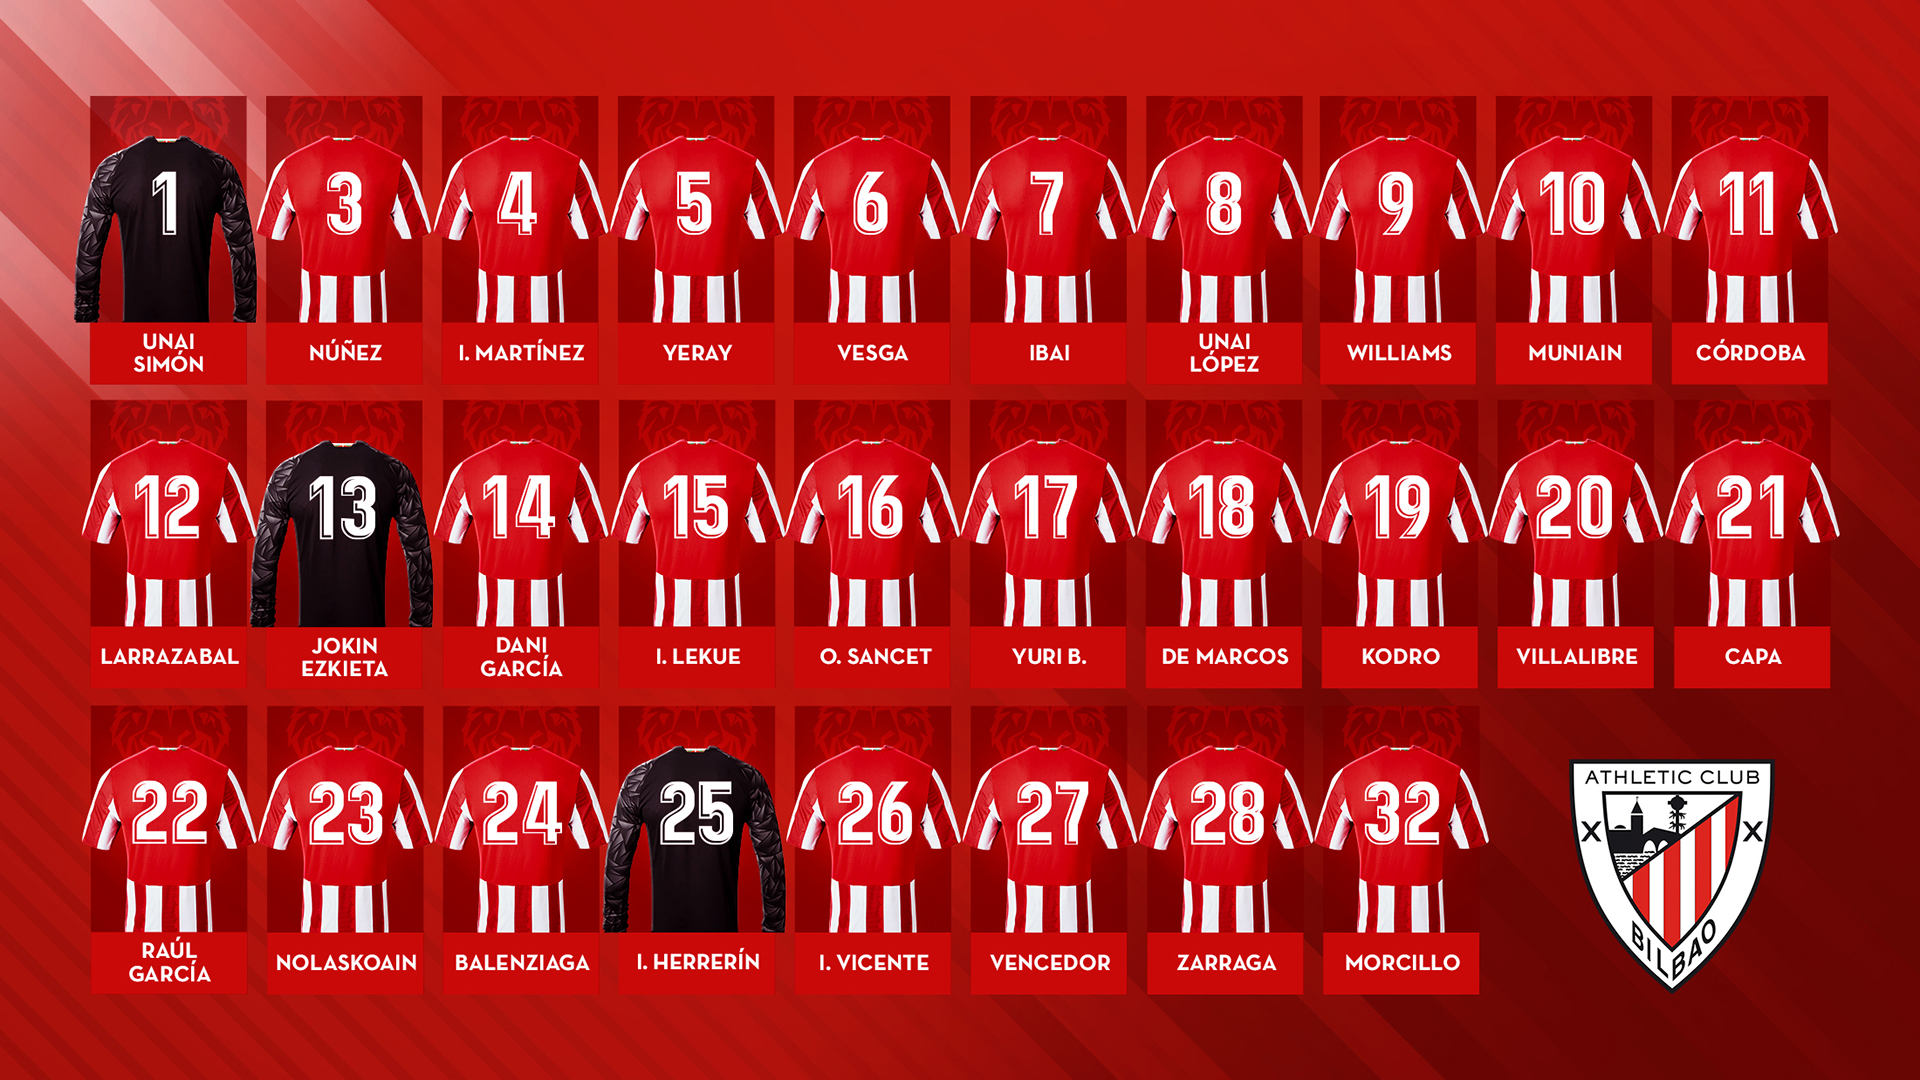 Athletic Club squad numbers for 2020-21